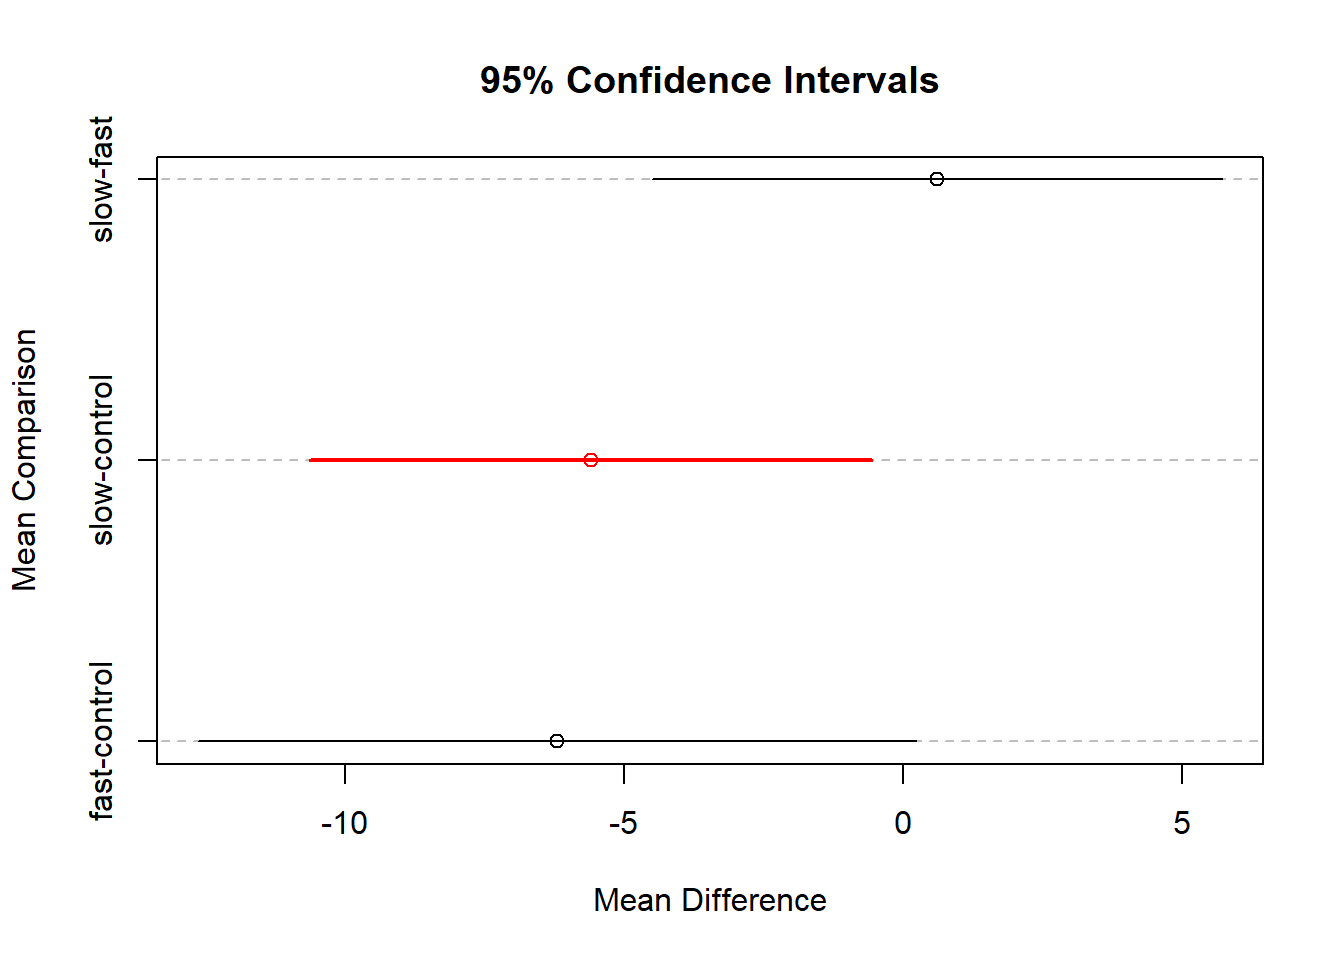 One-way ANOVA (Tukey's Post Hoc Test with 95% confidence interval) for